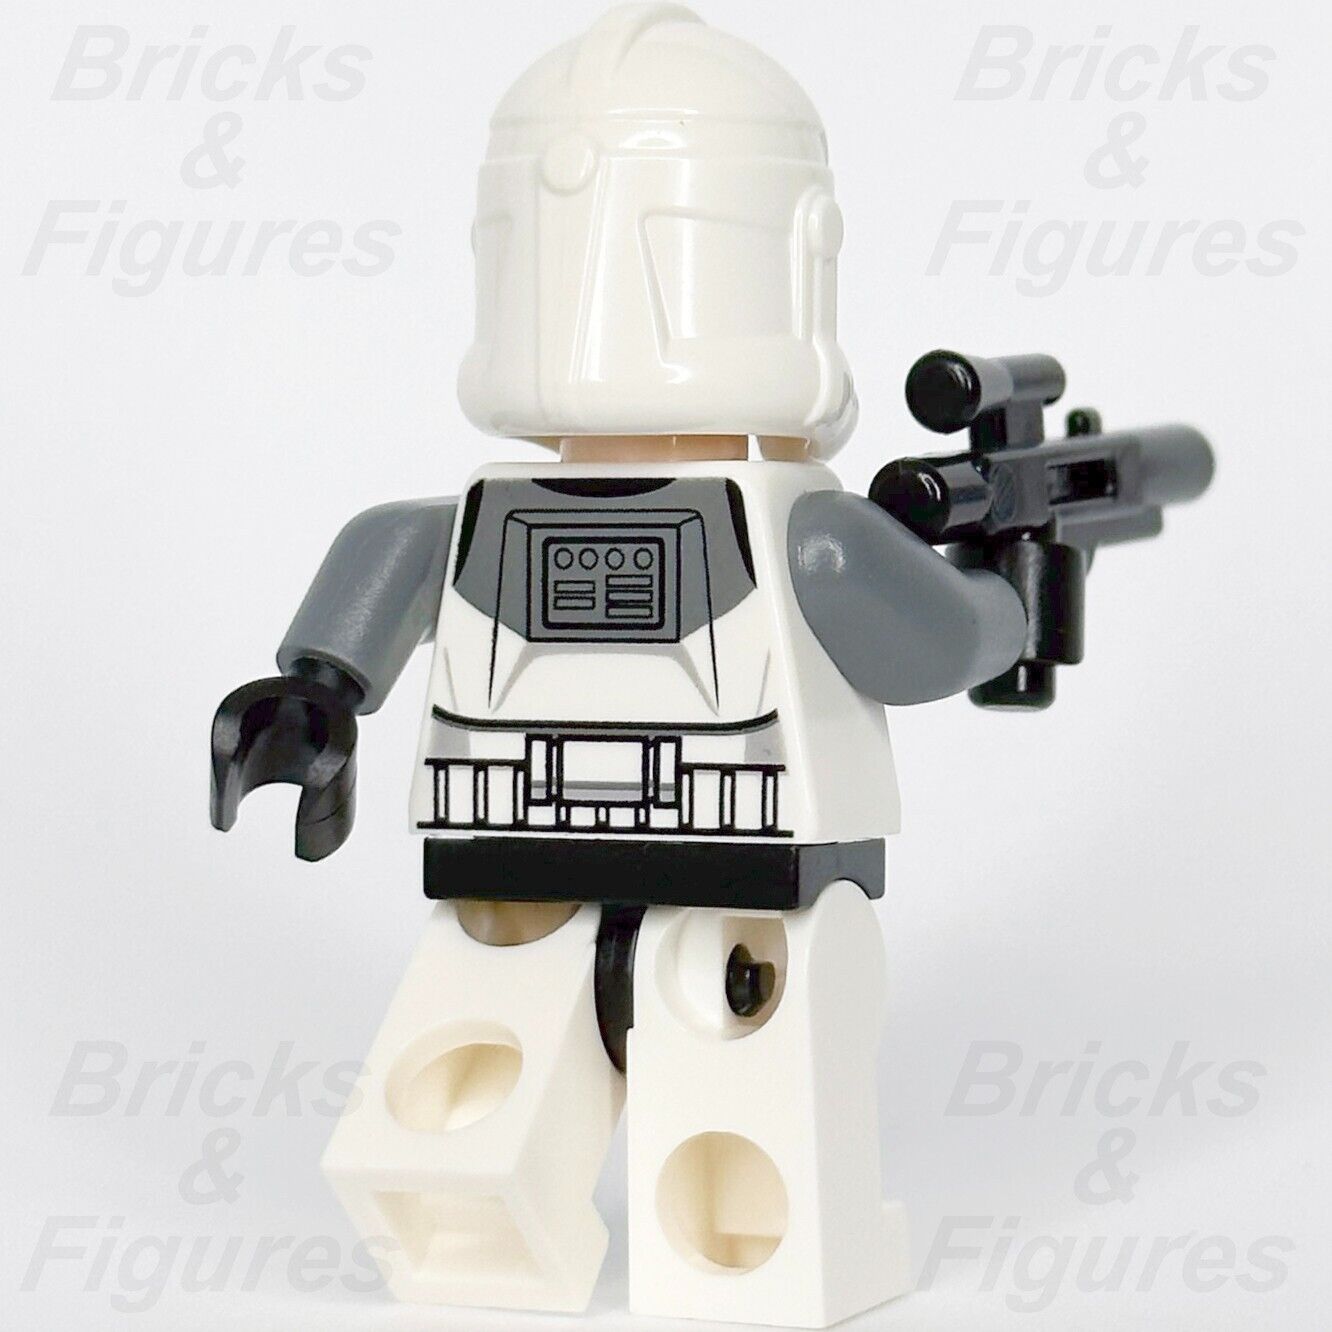 LEGO Star Wars Wolfpack Clone Trooper Minifigure Phase 2 104th 75045 sw0537